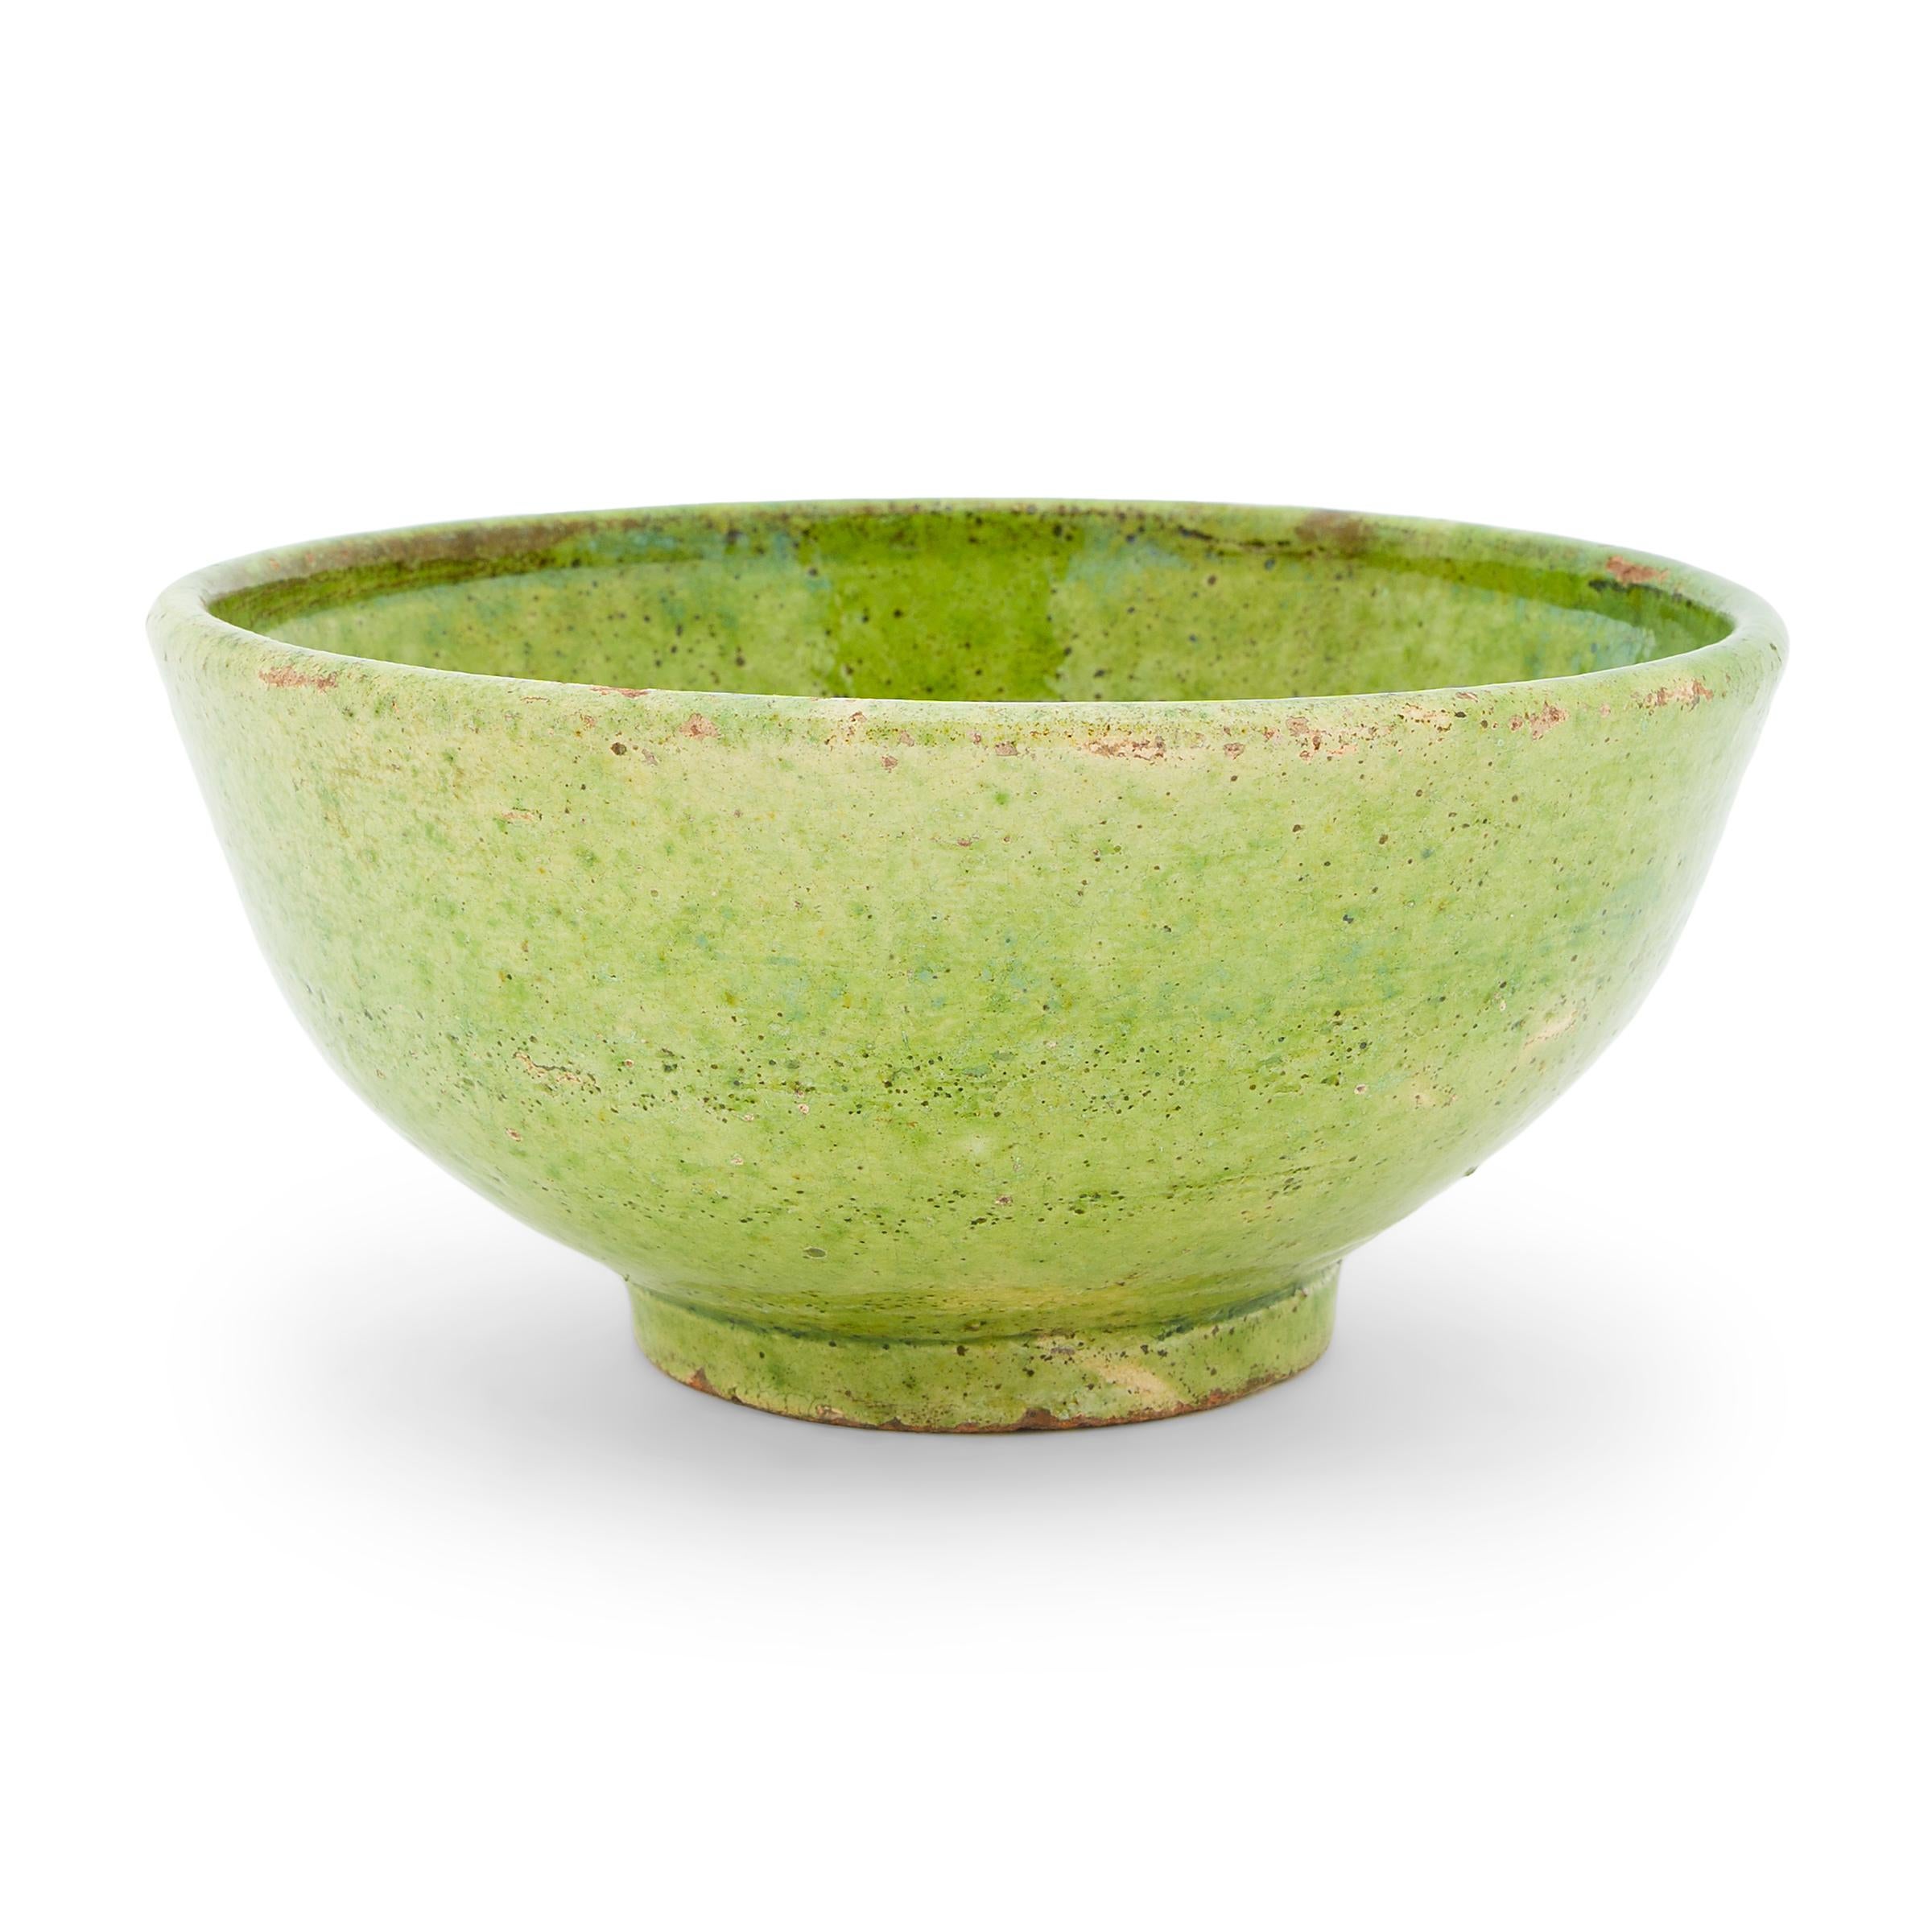 This small terracotta bowl dates to the mid-19th century and has a simple, round form with a short footed base and thin walls that flare slightly at the lip. The bowl is coated inside and out with a bright green glaze, wonderfully textured with